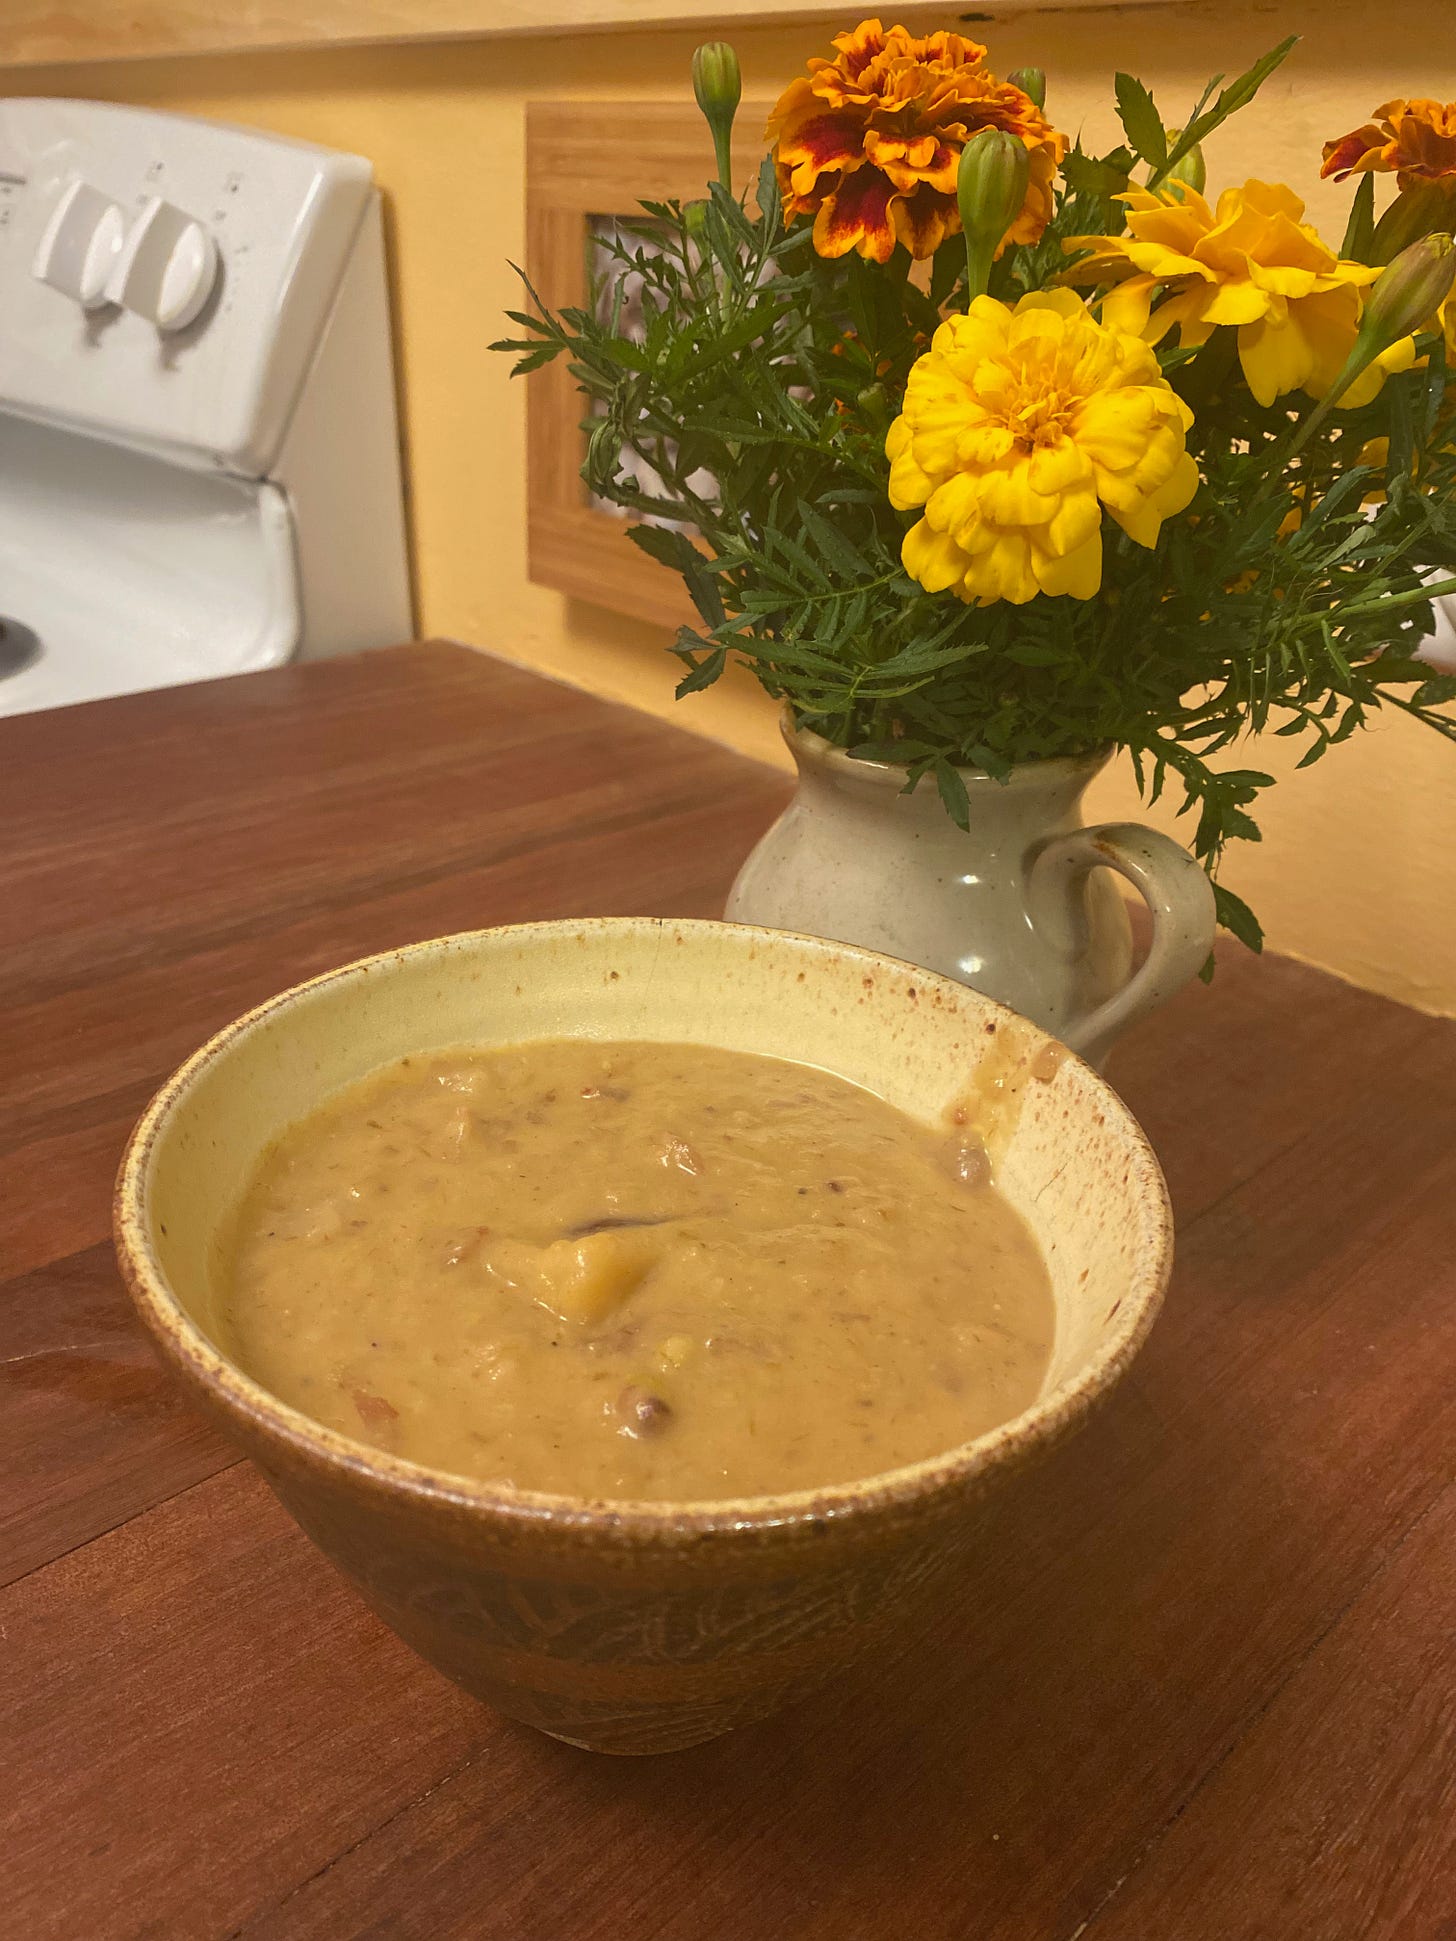 A ceramic bowl of chunky, creamy potato leek soup sits on a wooden counter in front of a vase of marigolds. Part of the stove is visible in the background.